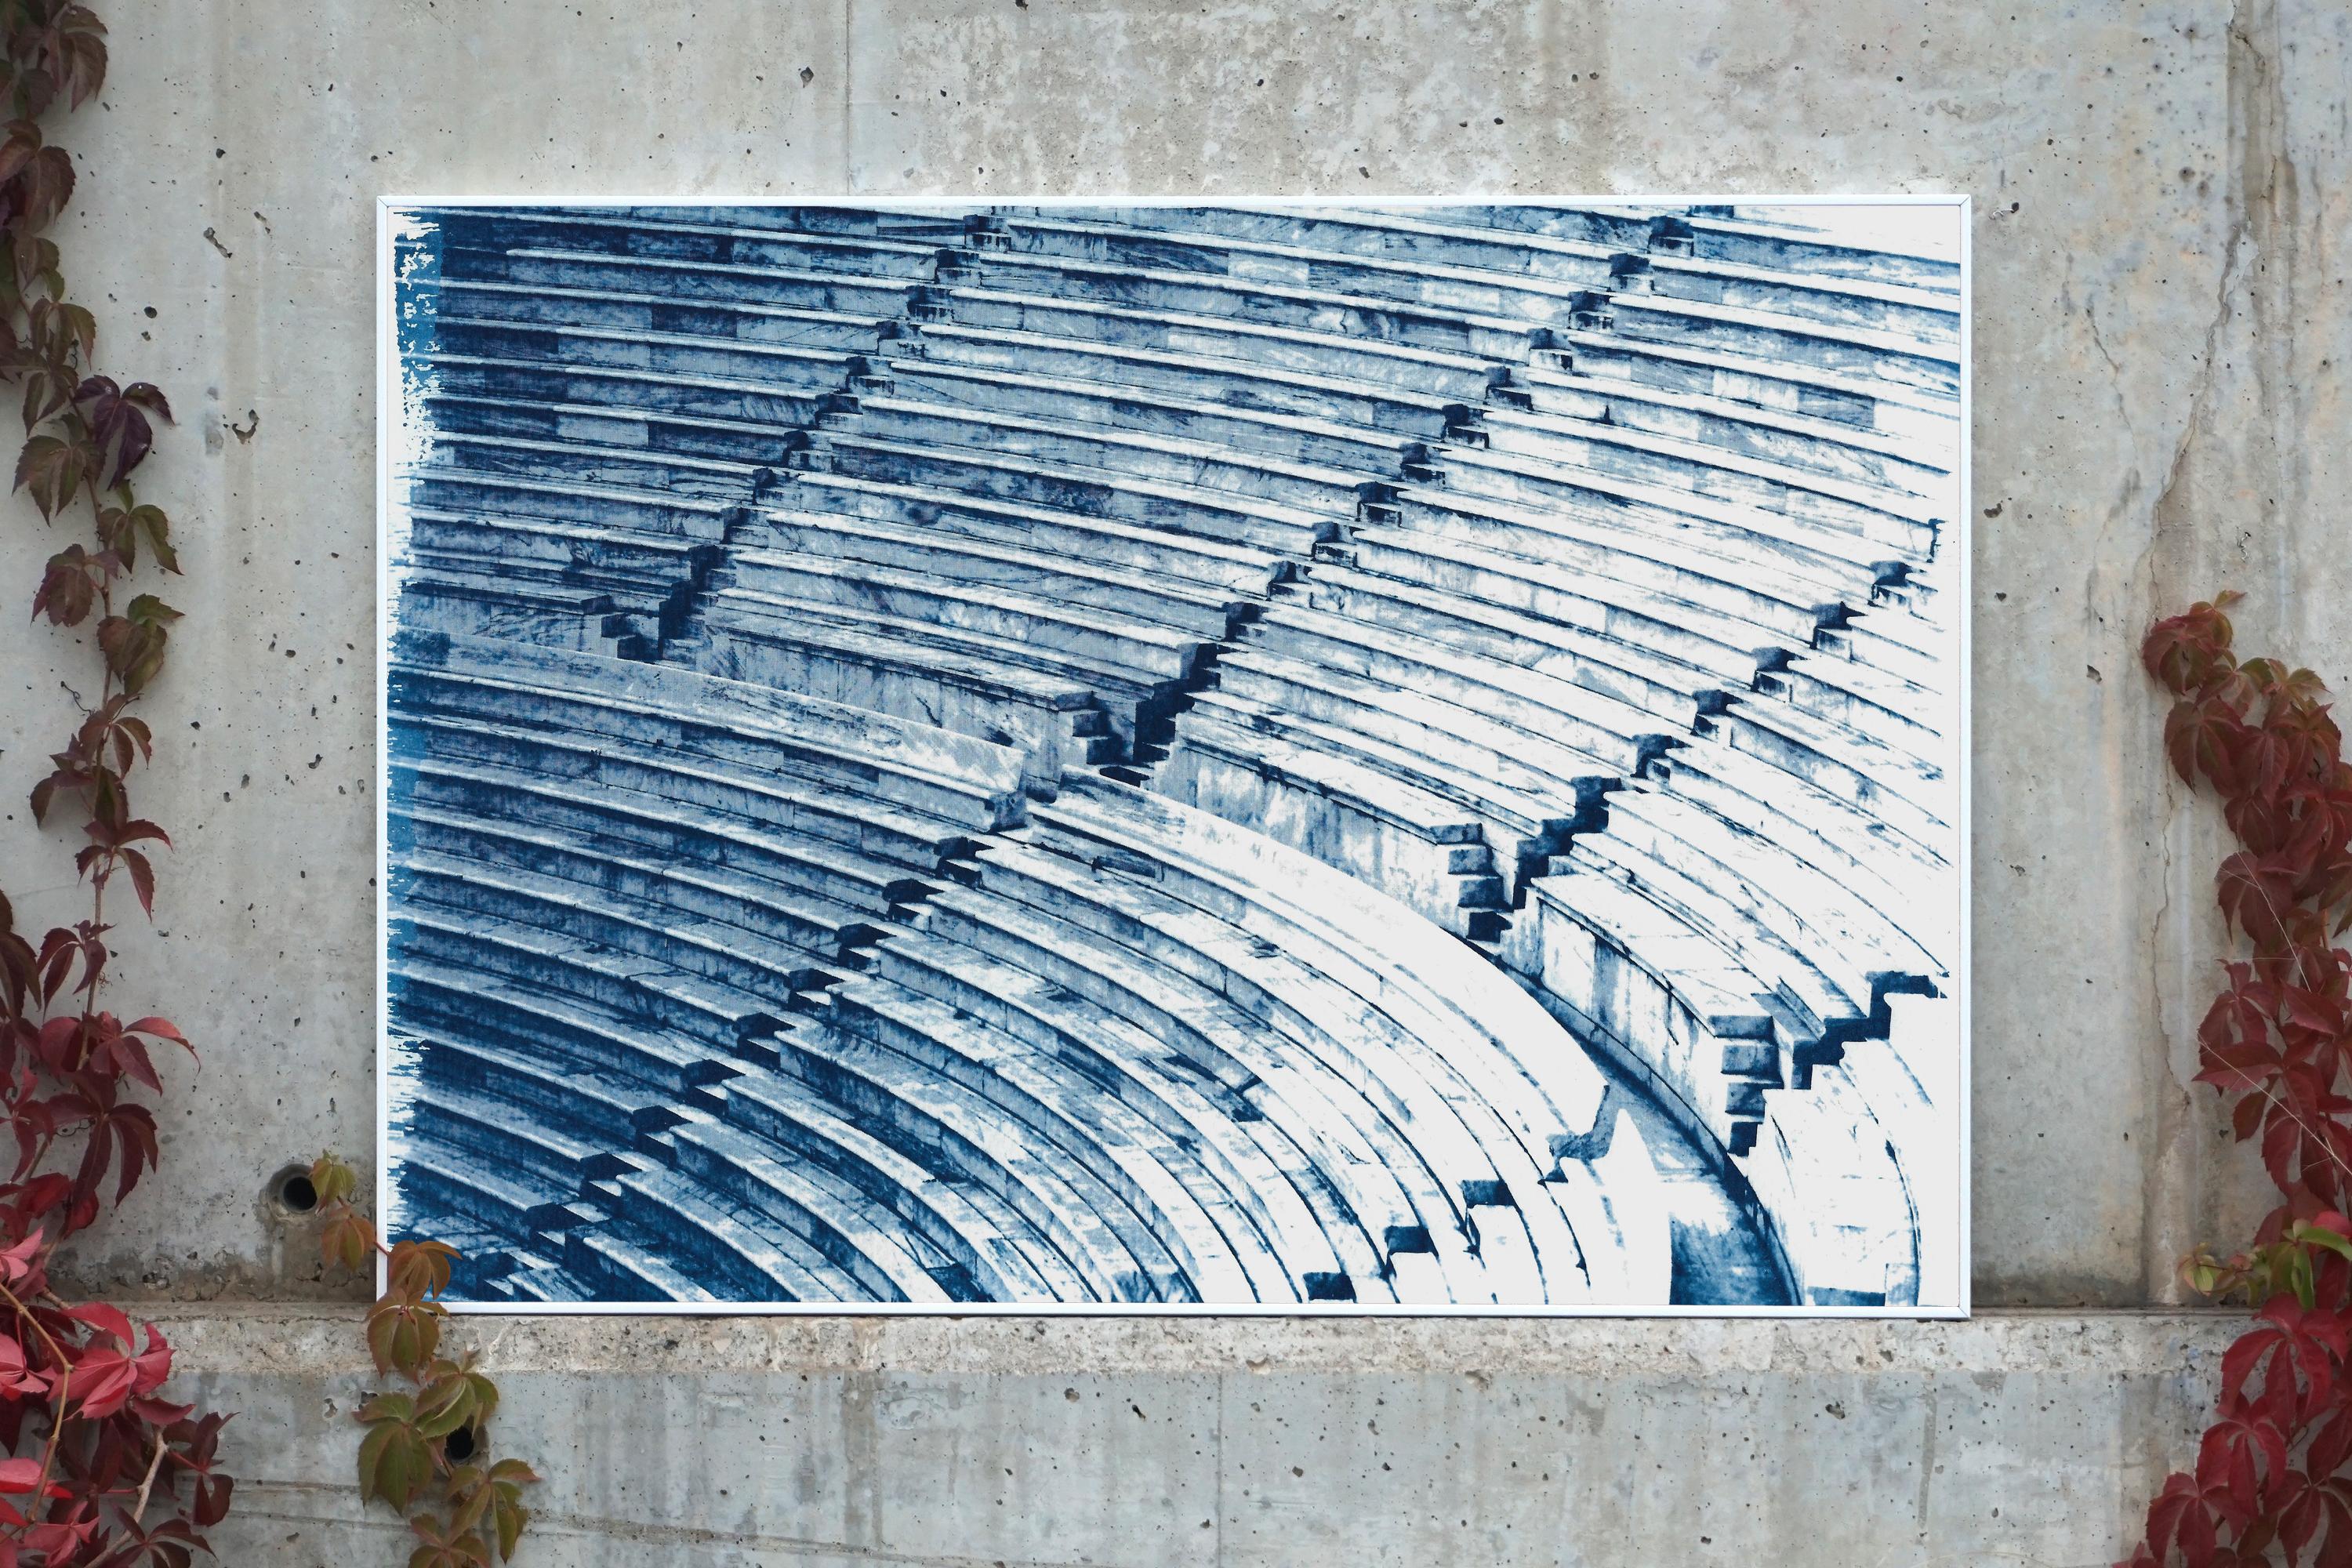 Diptych of Ancient Theaters, 200cmx70cm Cyanotypes, Greek and Roman Architecture 1